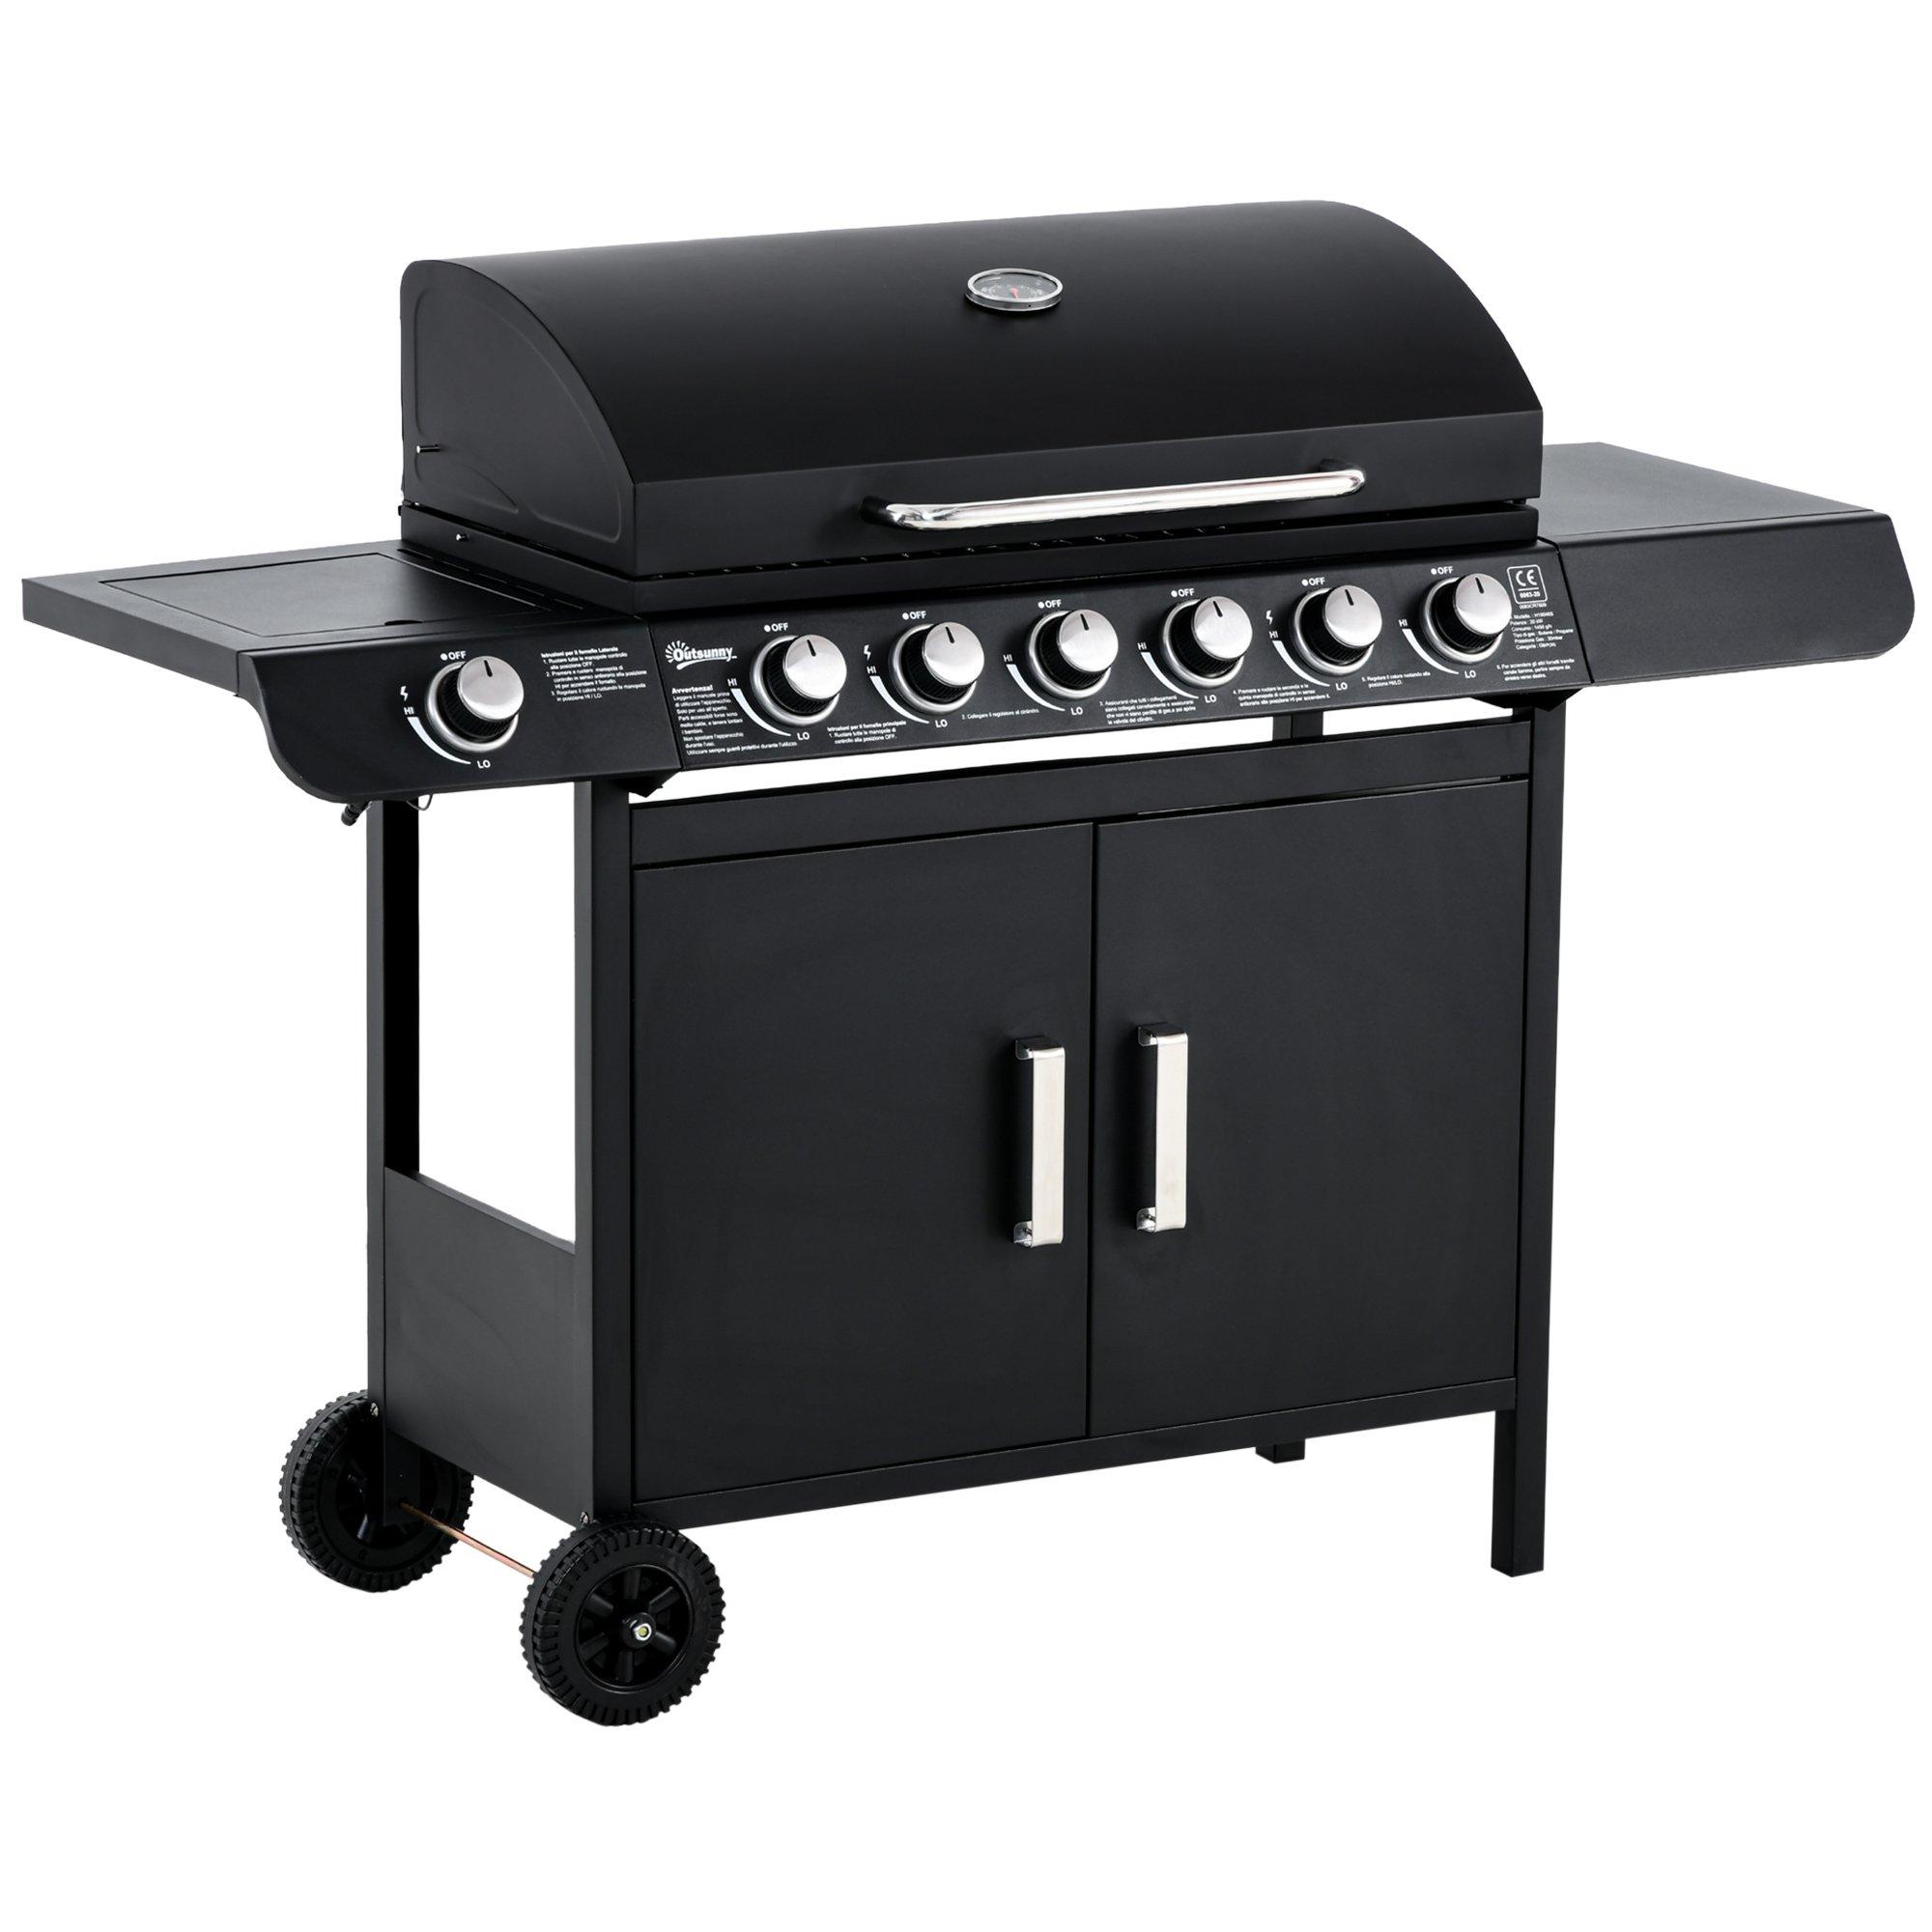 6+1 Burner Gas BBQ Grill Garden Barbecue with Large Cooking Area Wheels Cabinet